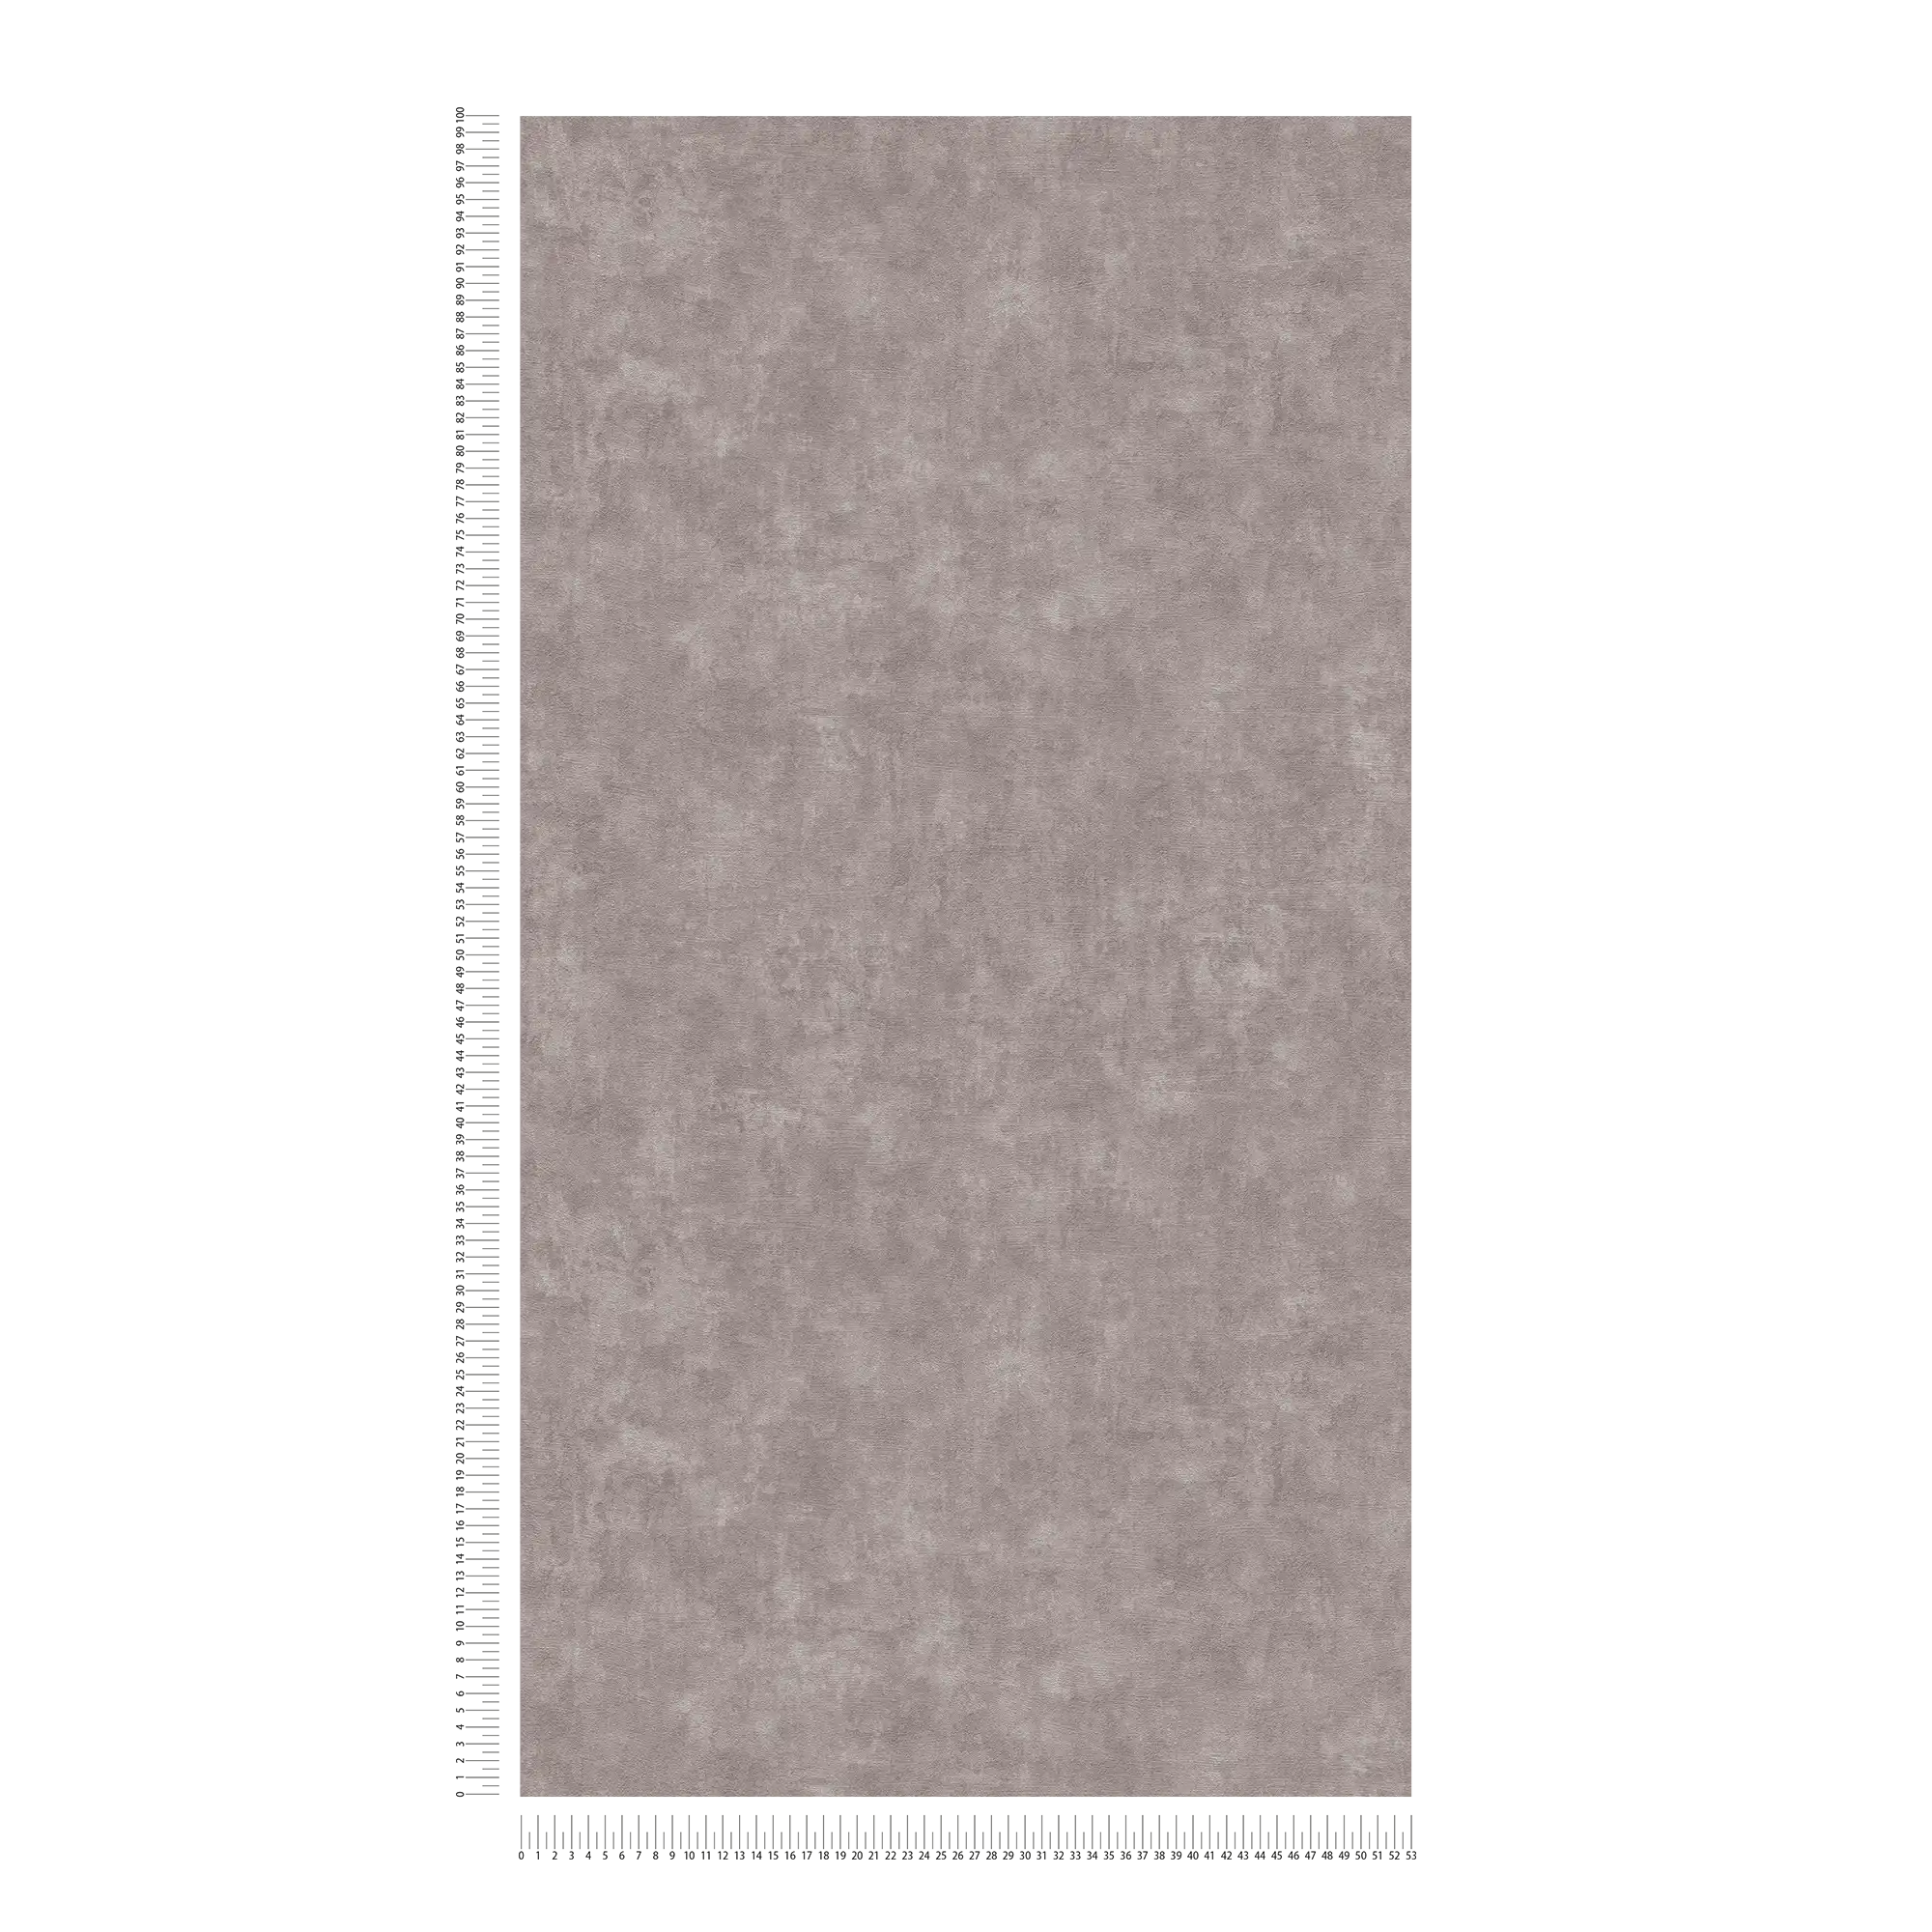             Non-woven wallpaper plains with concrete look and structure - grey
        